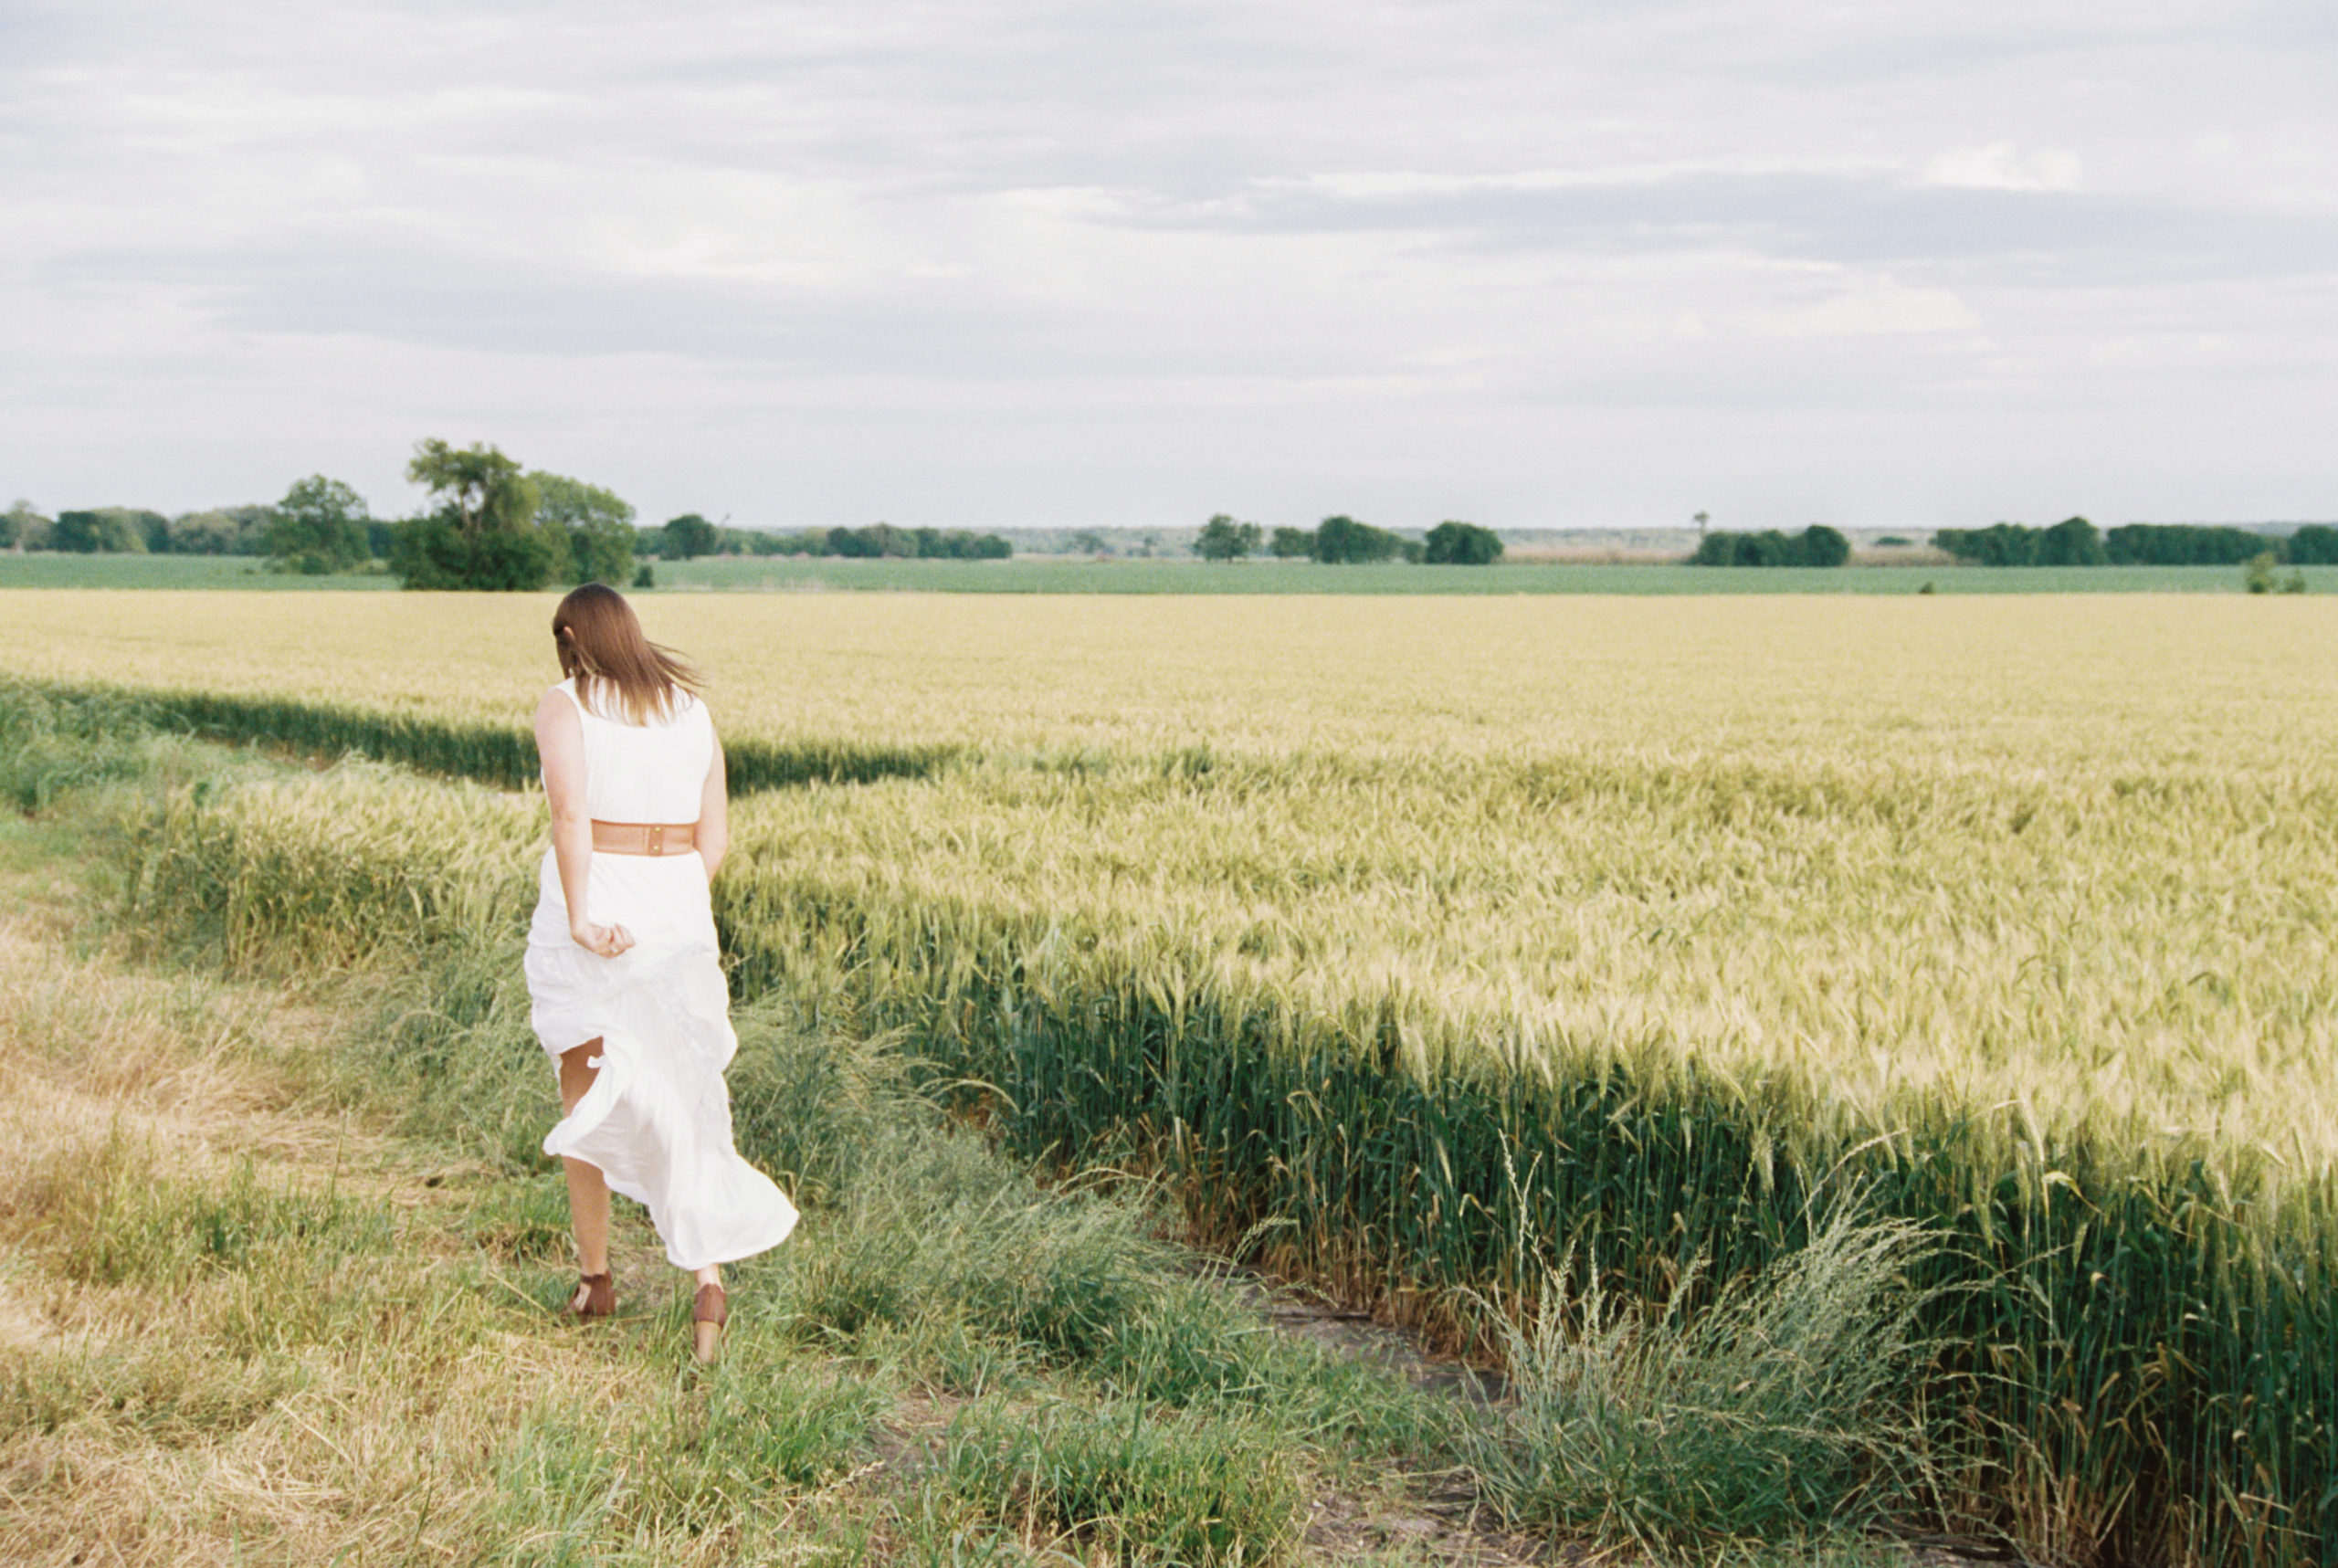 A woman in a white dress walks off in the distance, next to the wheat field swing the bottom of her dress